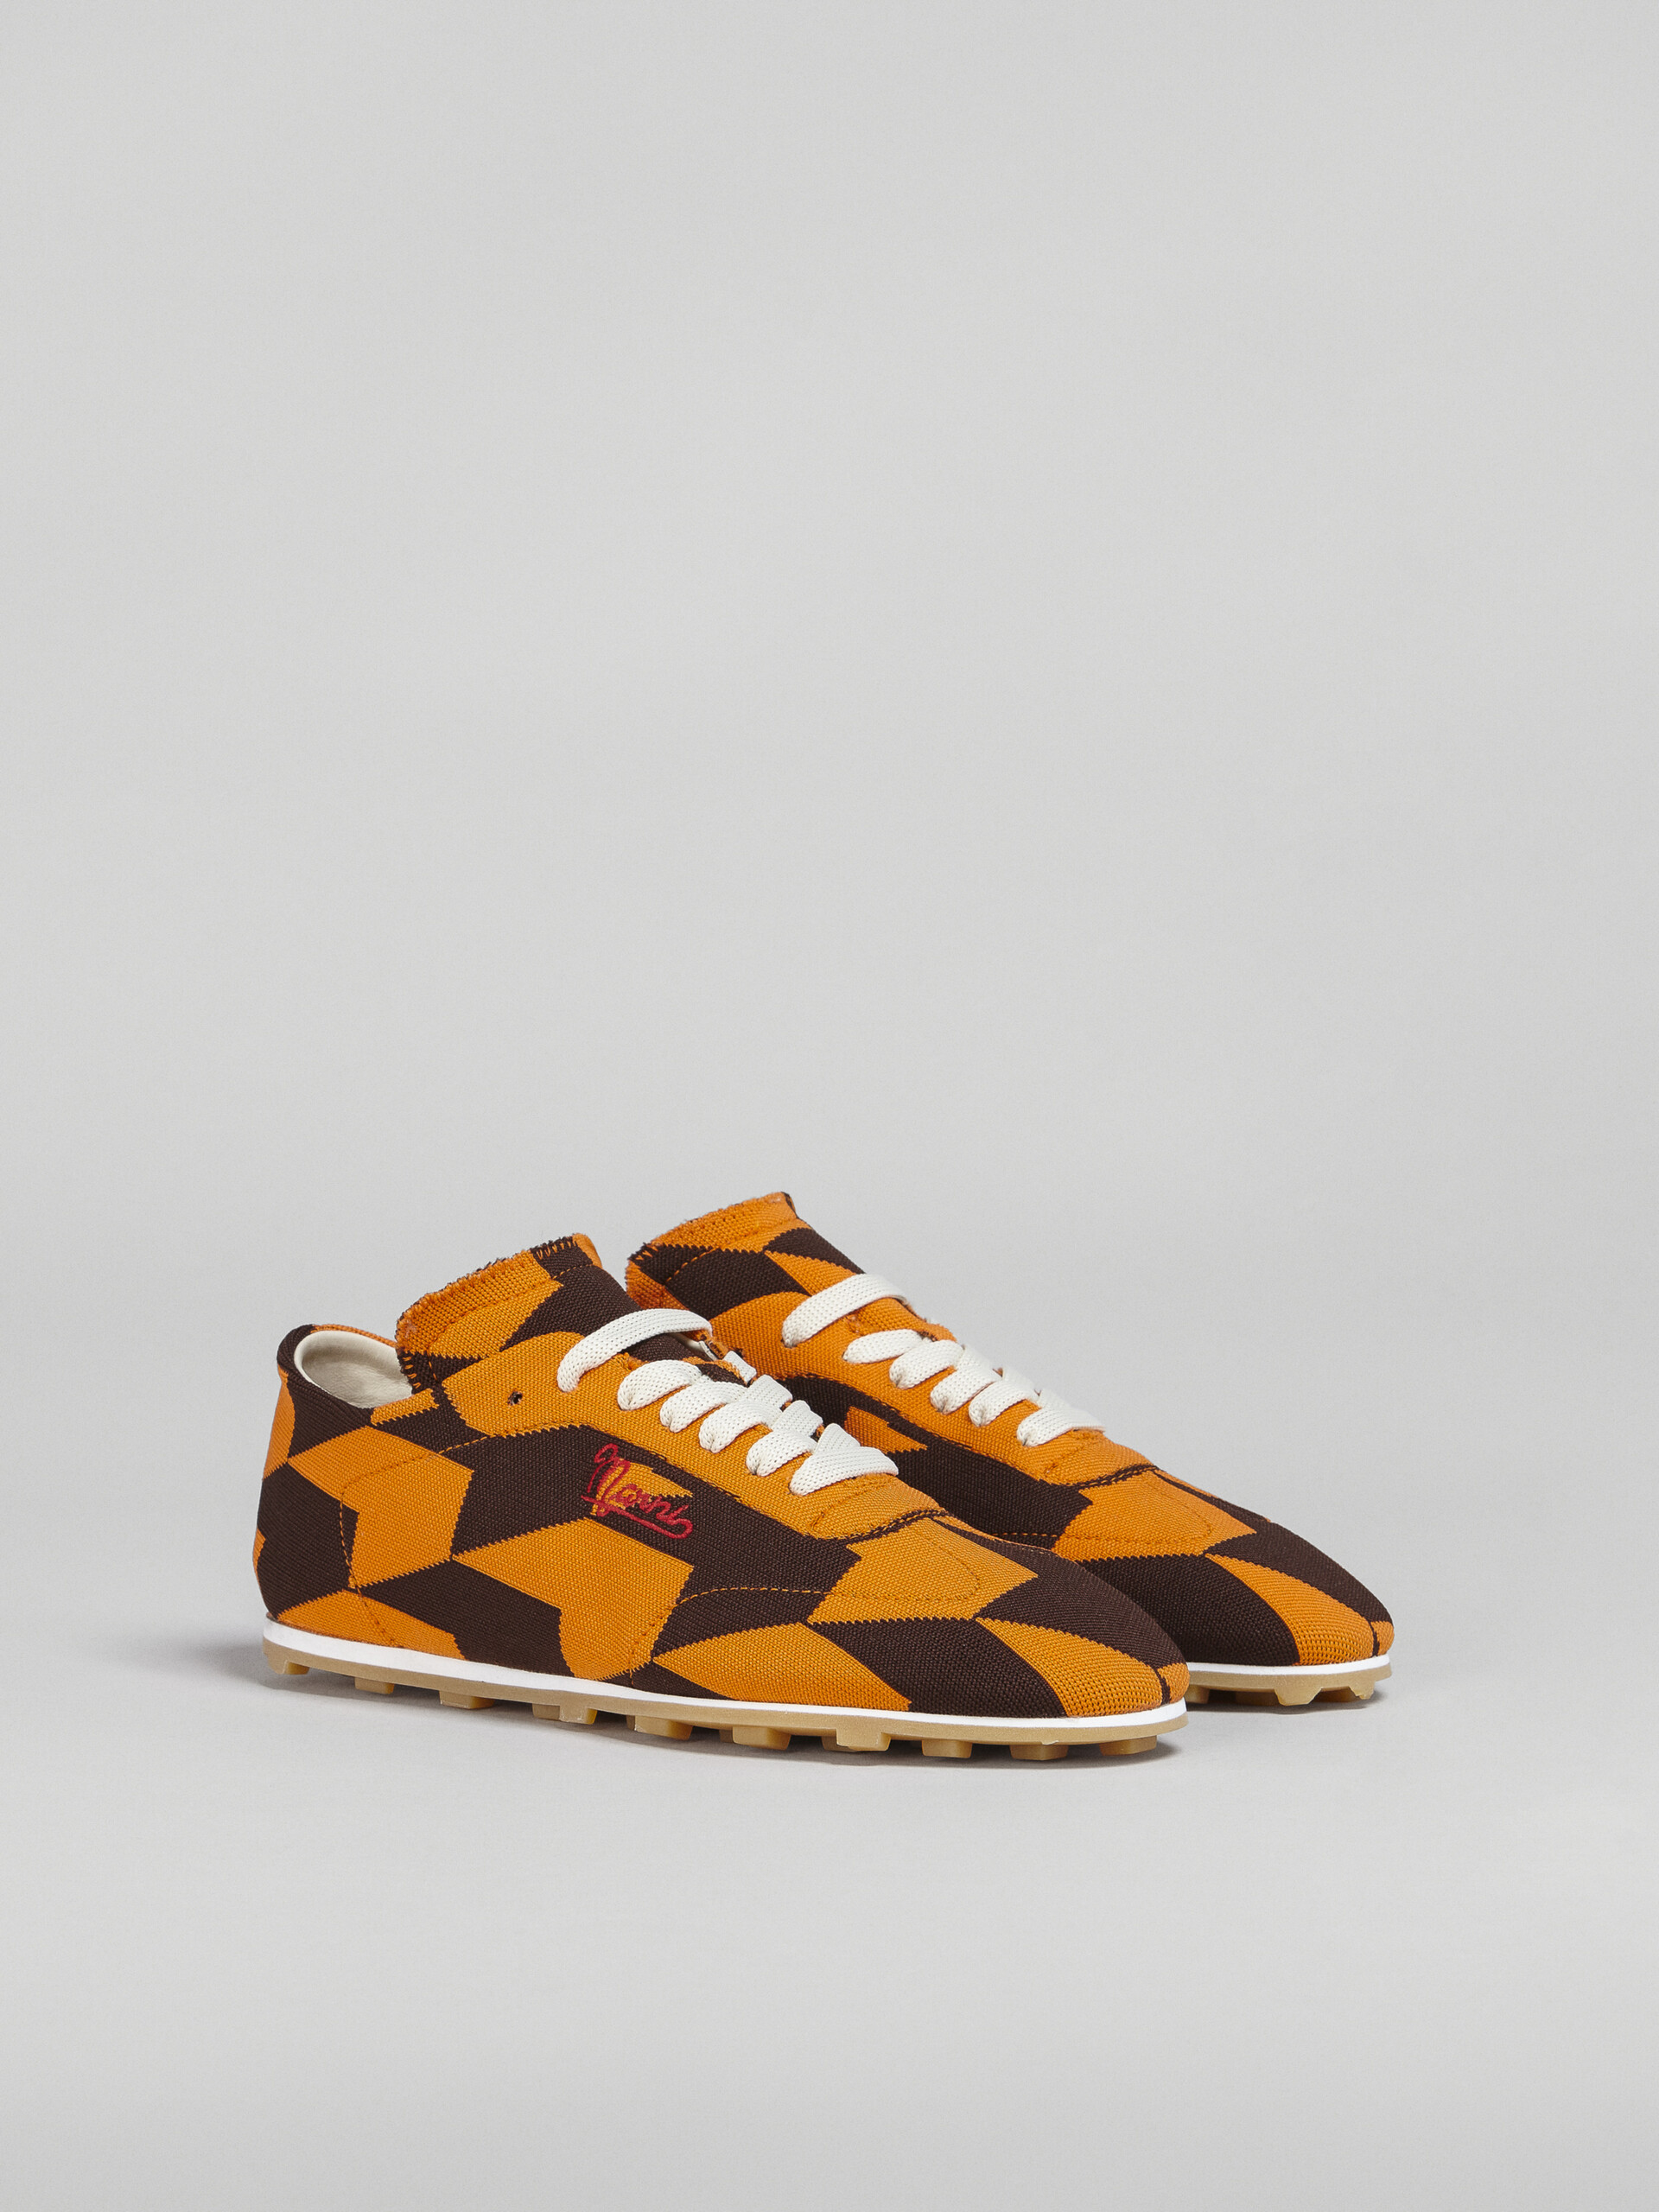 Houndstooth stretch jacquard PEBBLE sneaker - Sneakers - Image 2